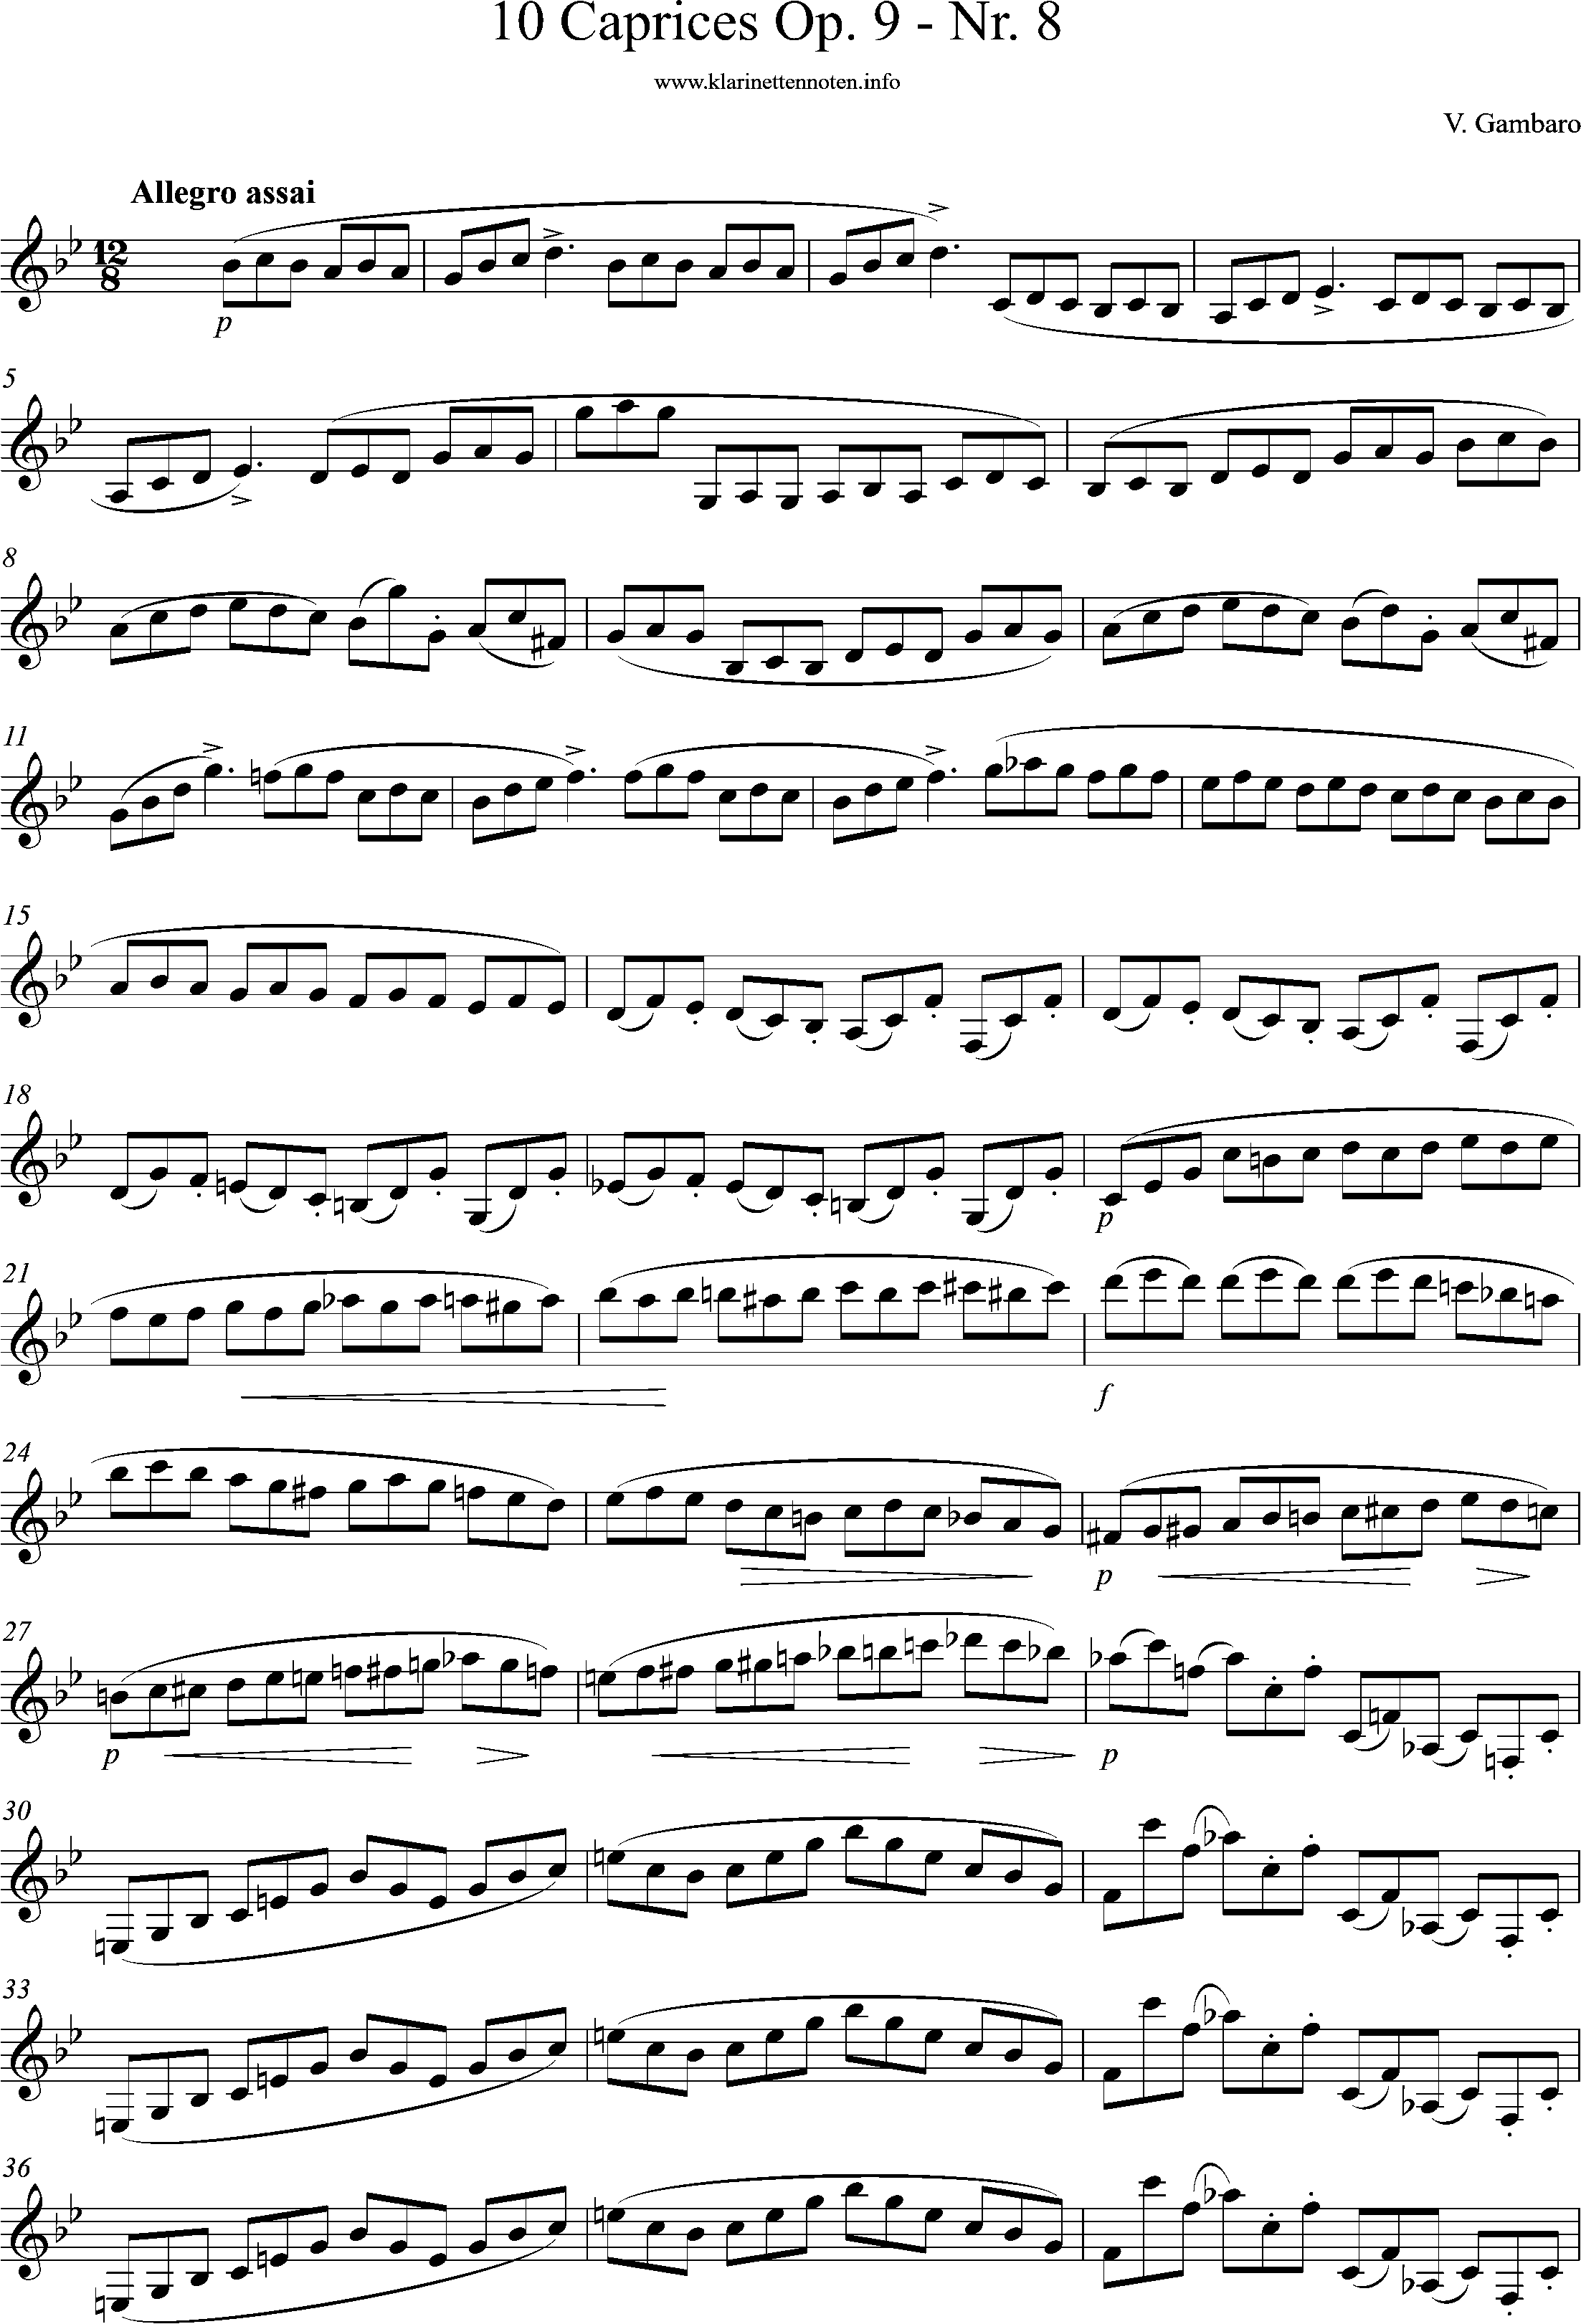 10 Caprices op. 9, Nr-8, page 1